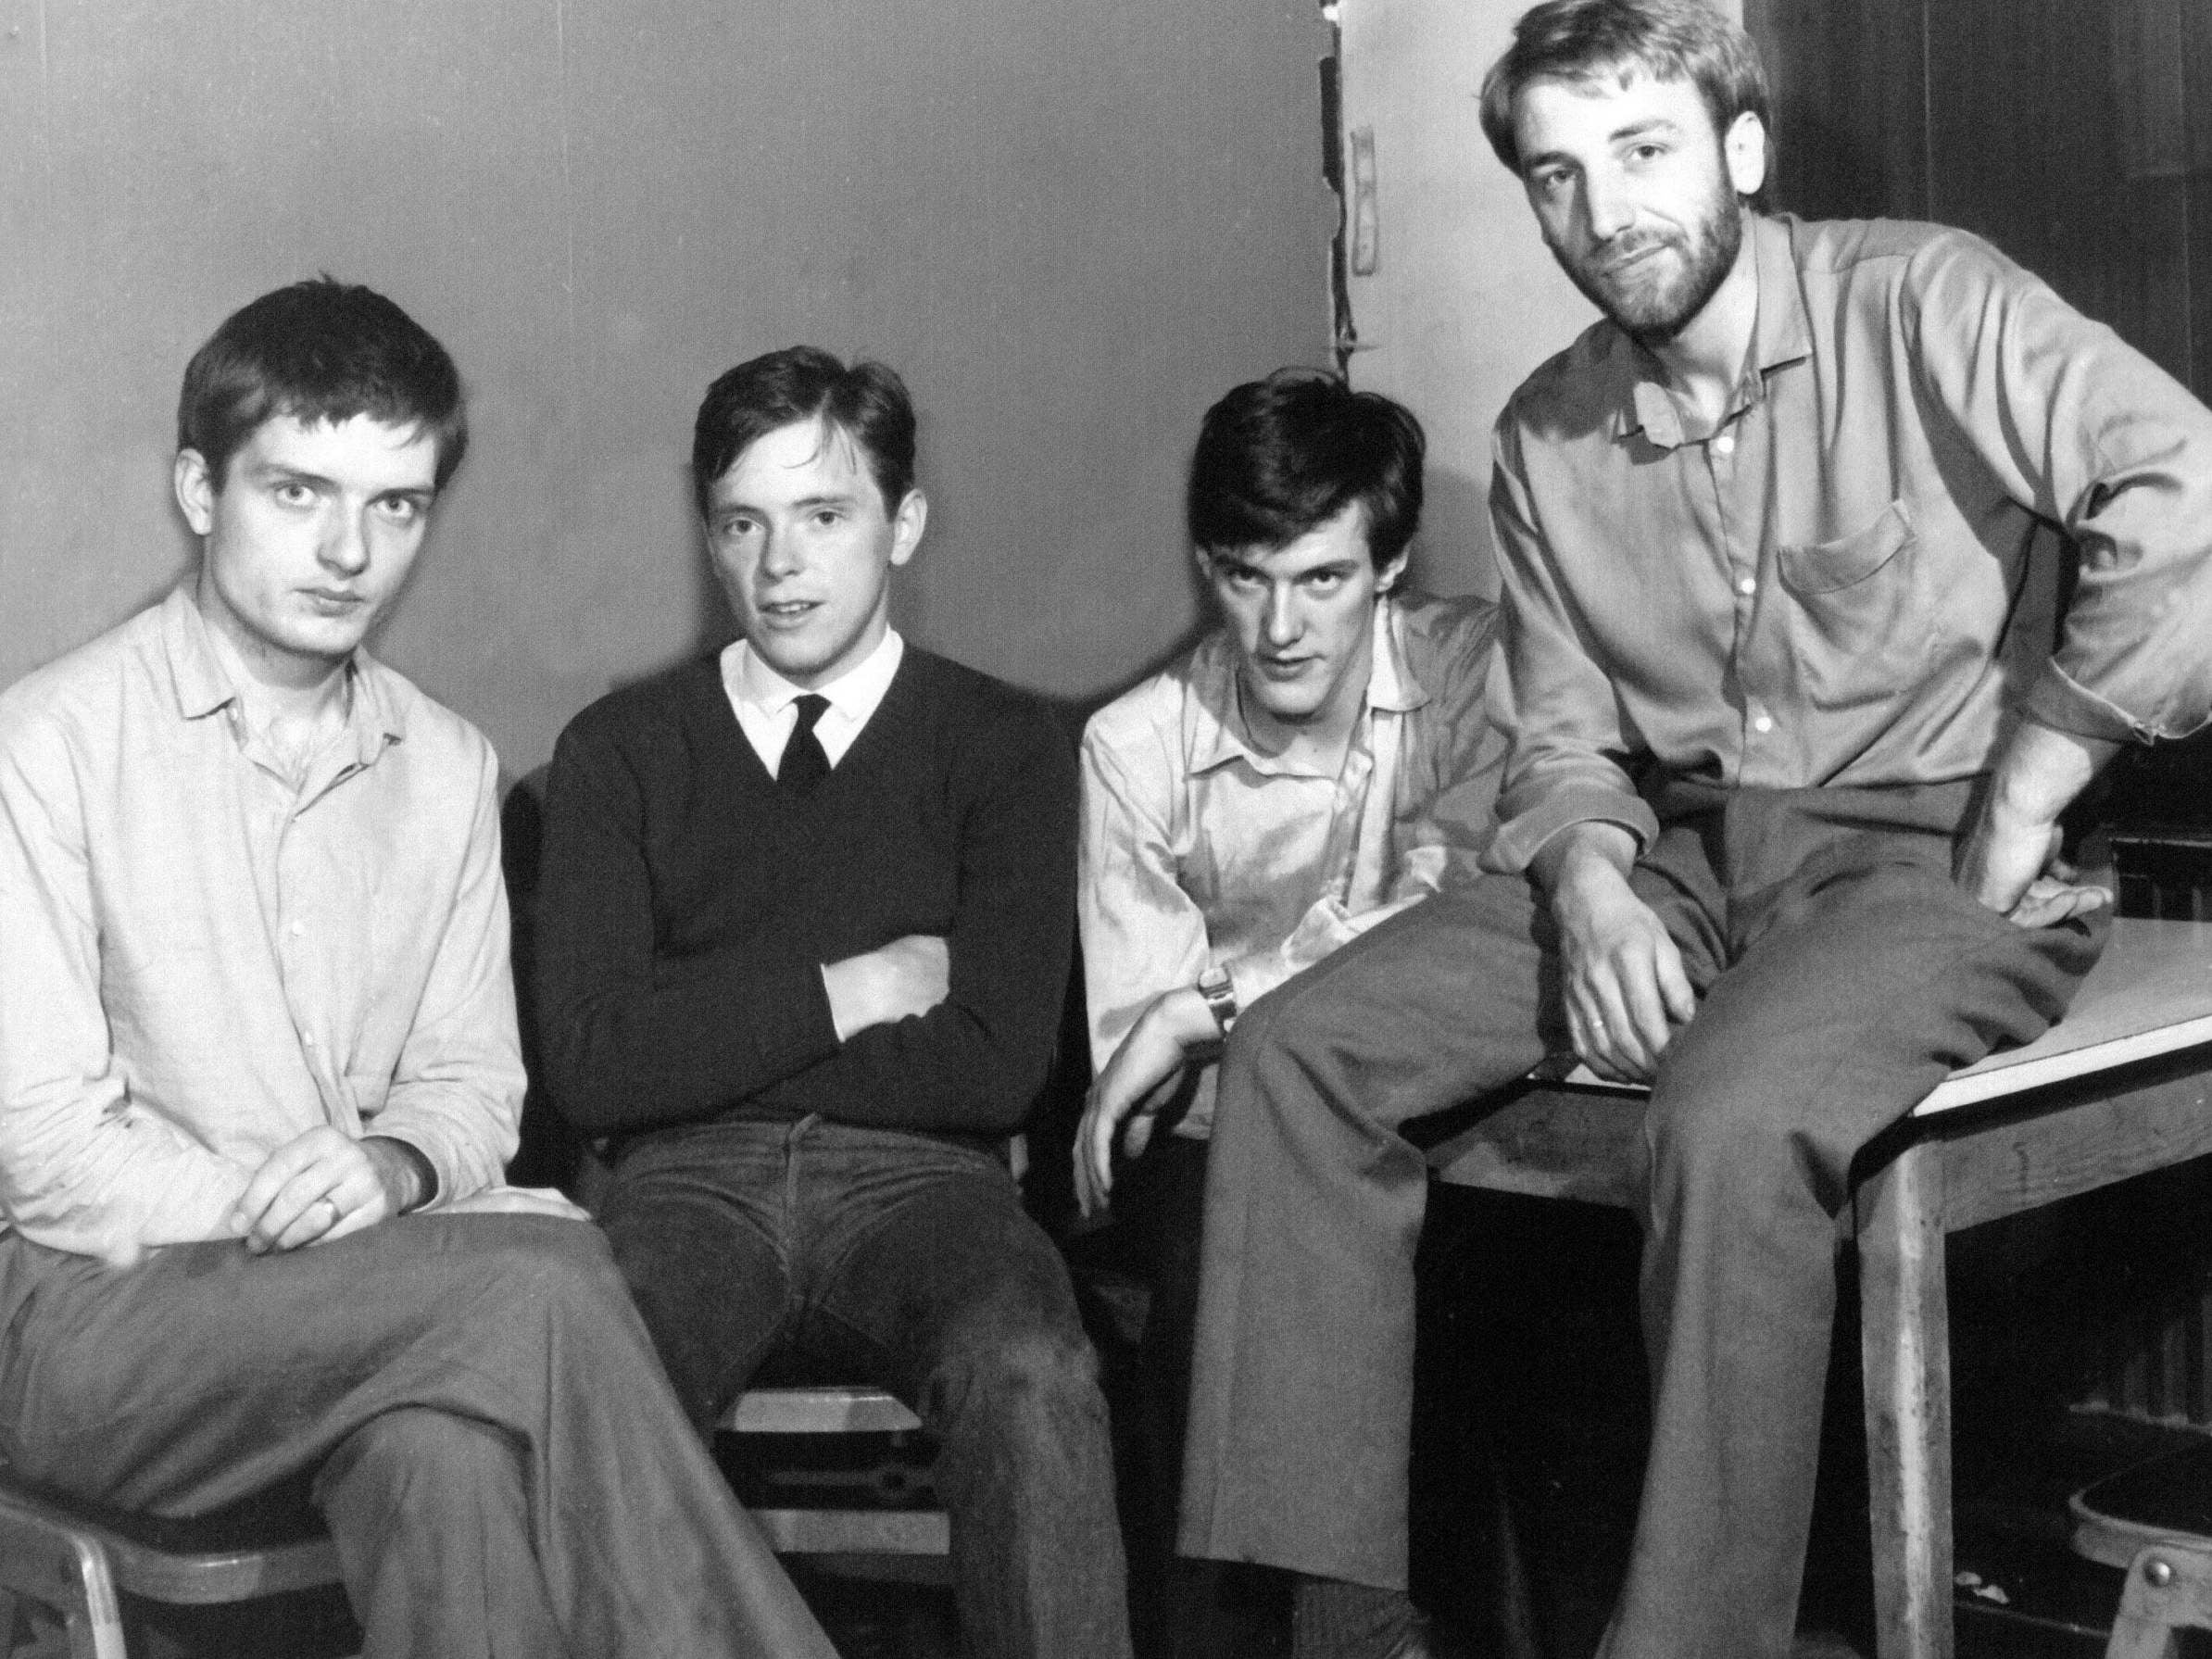 Here are the young men: (from left) Ian Curtis, Bernard Sumner, Stephen Morris and Peter Hook